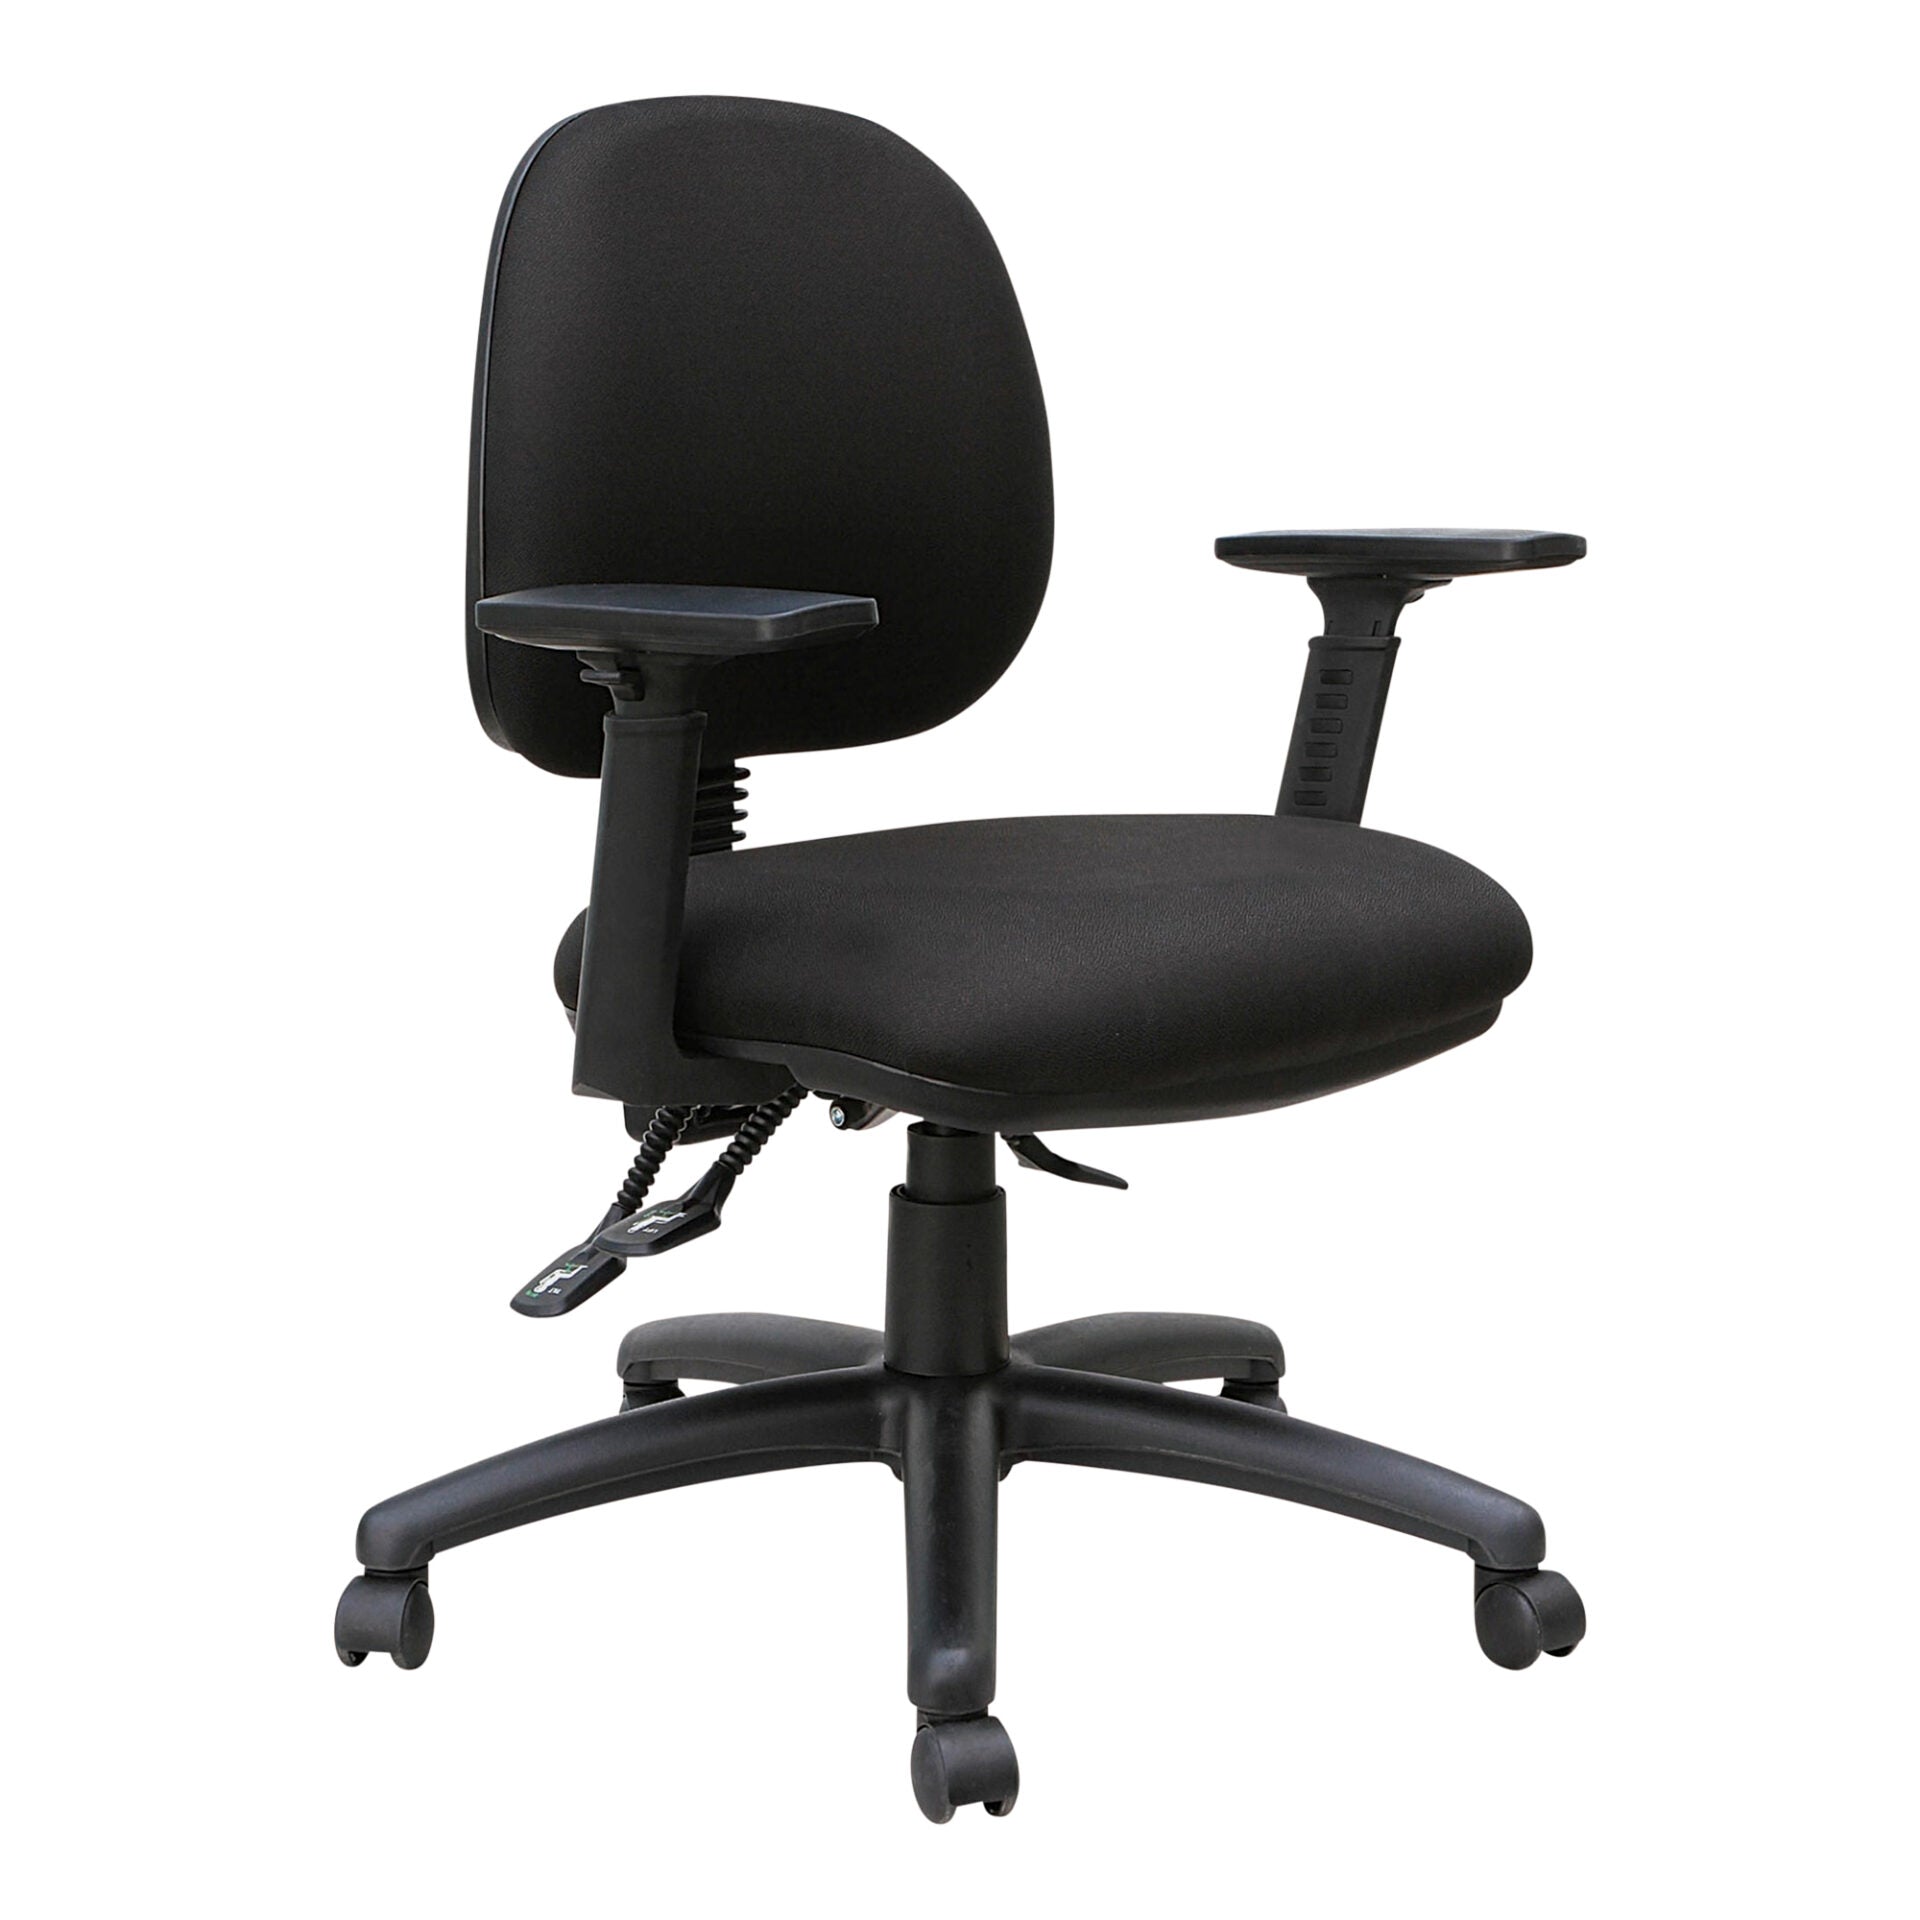 Mondo Java mid-back task chair in black, front view, with height adjustable arms.